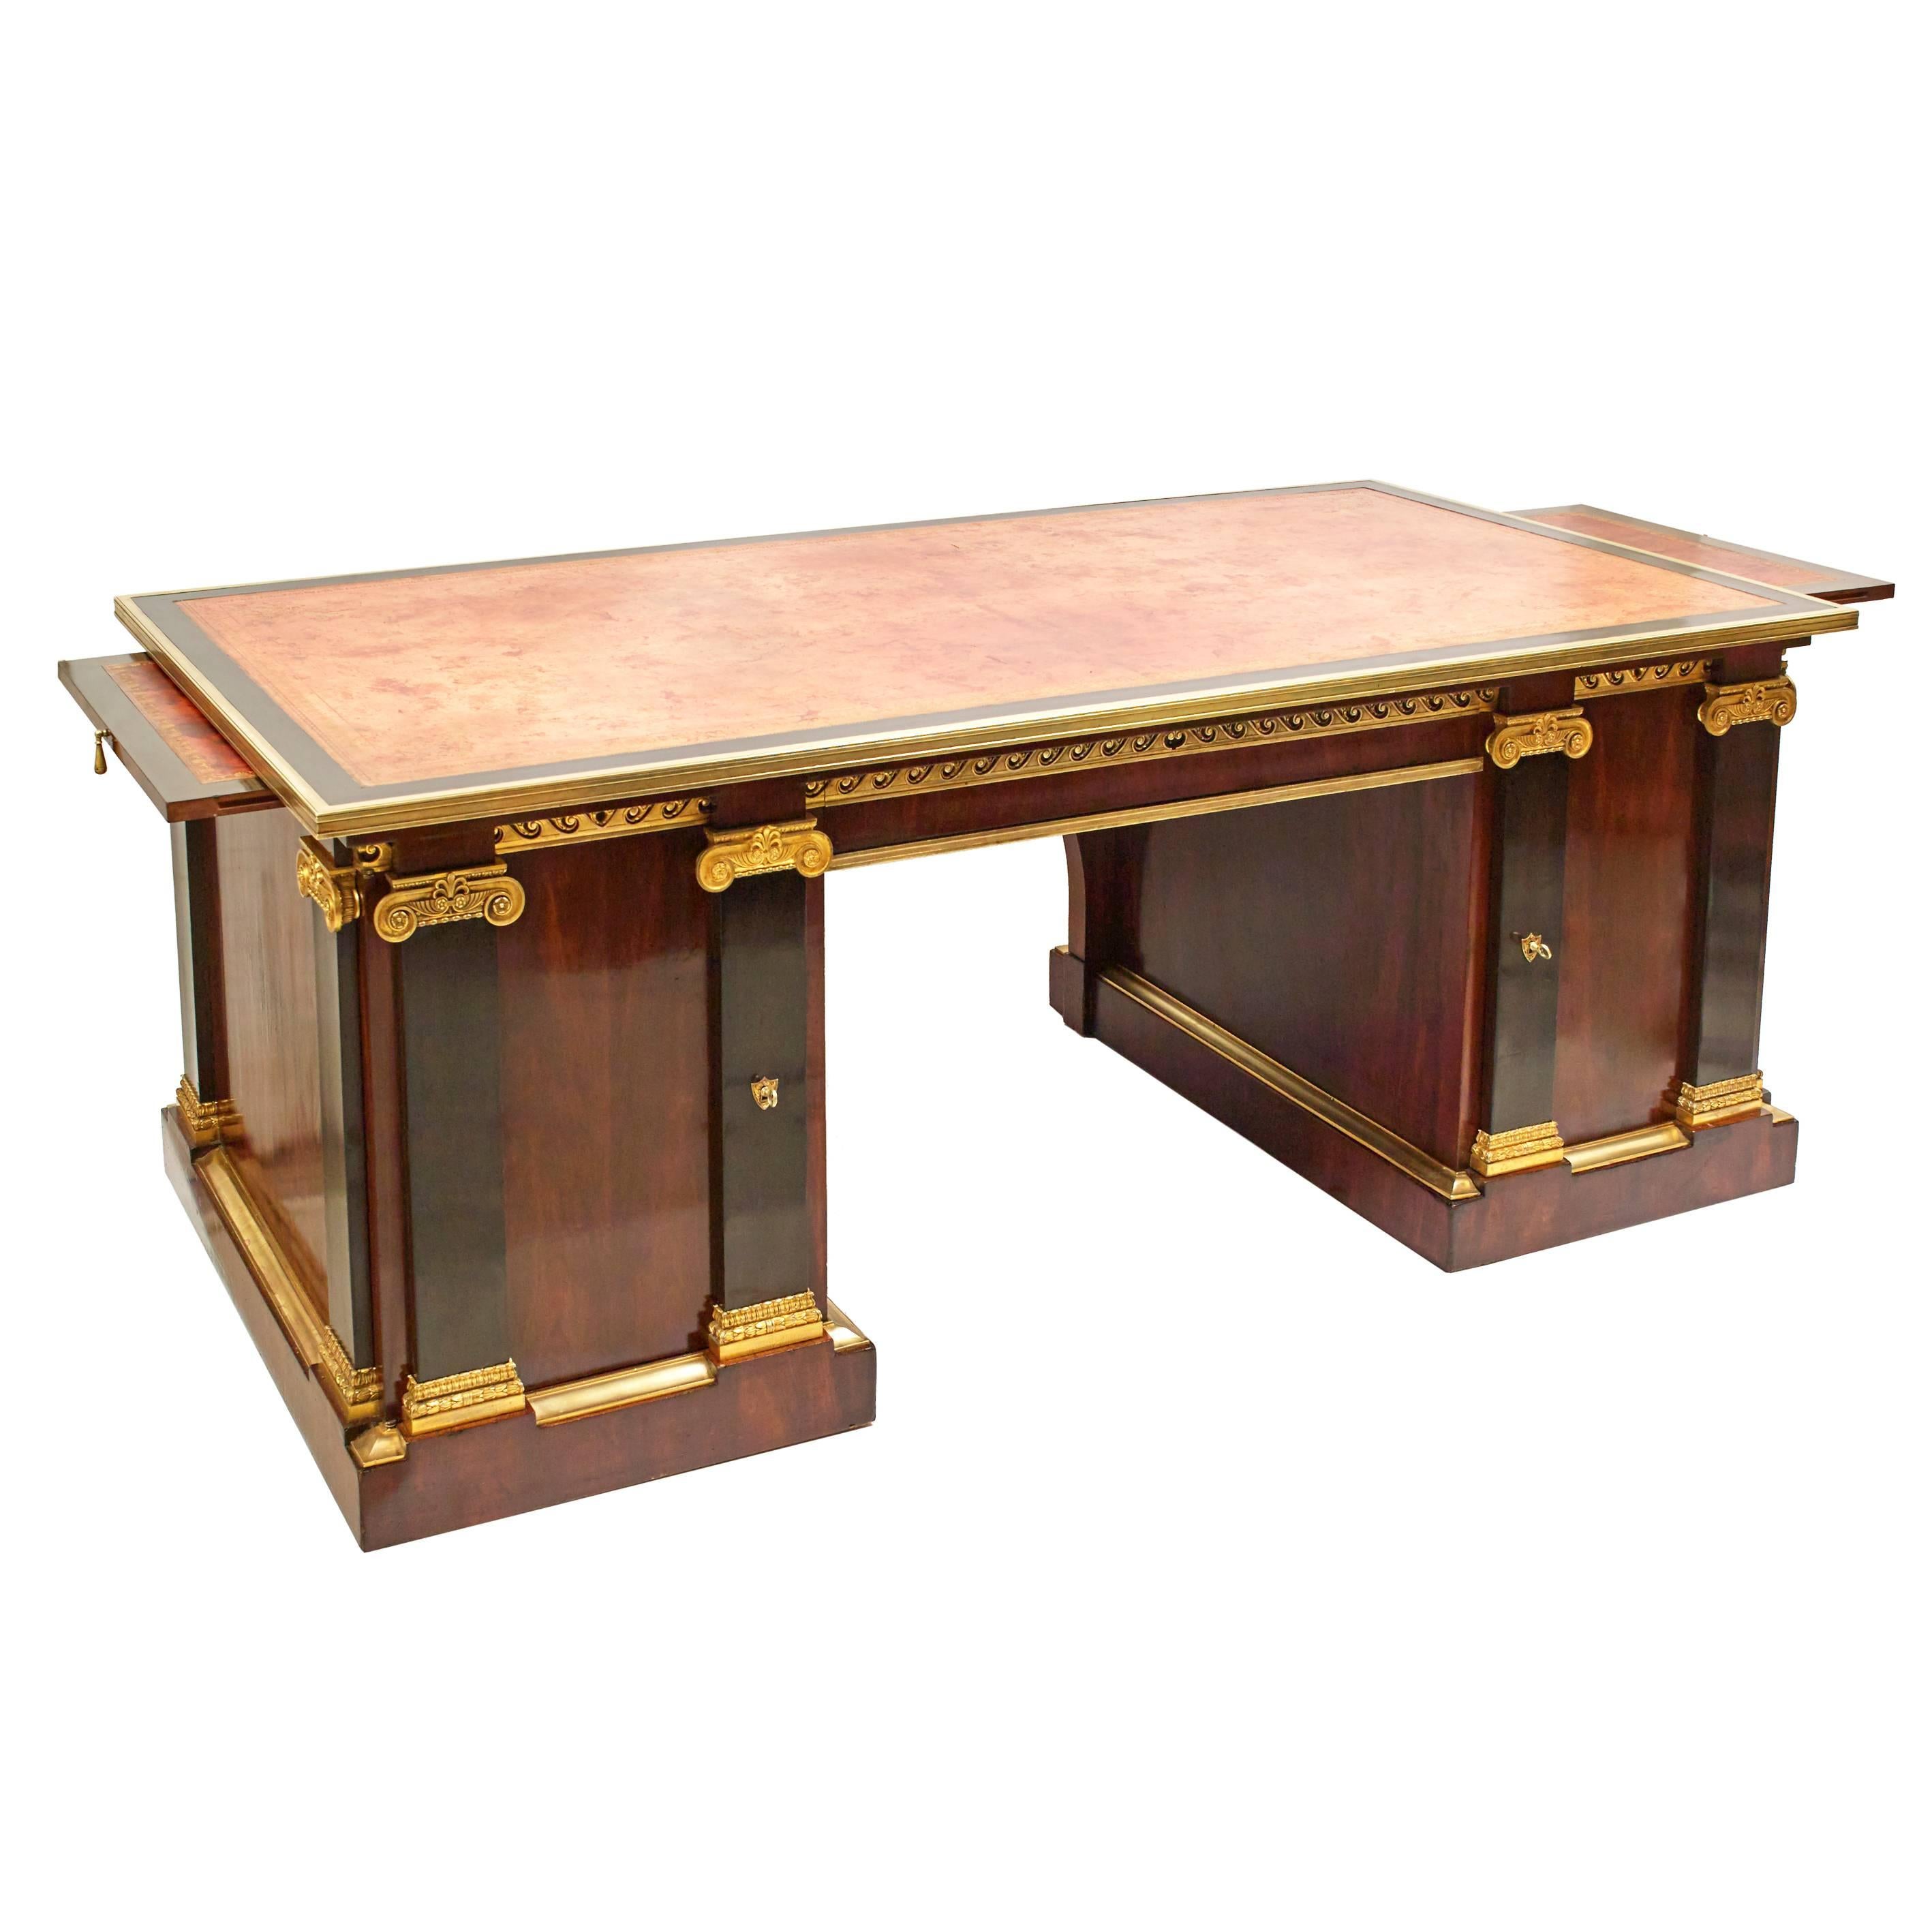 An impressive French Empire neoclassical pedestal desk in mahogany with ebony details, circa 1850. Mounted in ormolu, with ionic column and Vitruvian scroll decoration, and extension leaves measuring 31cm each. Boasting an original leather top